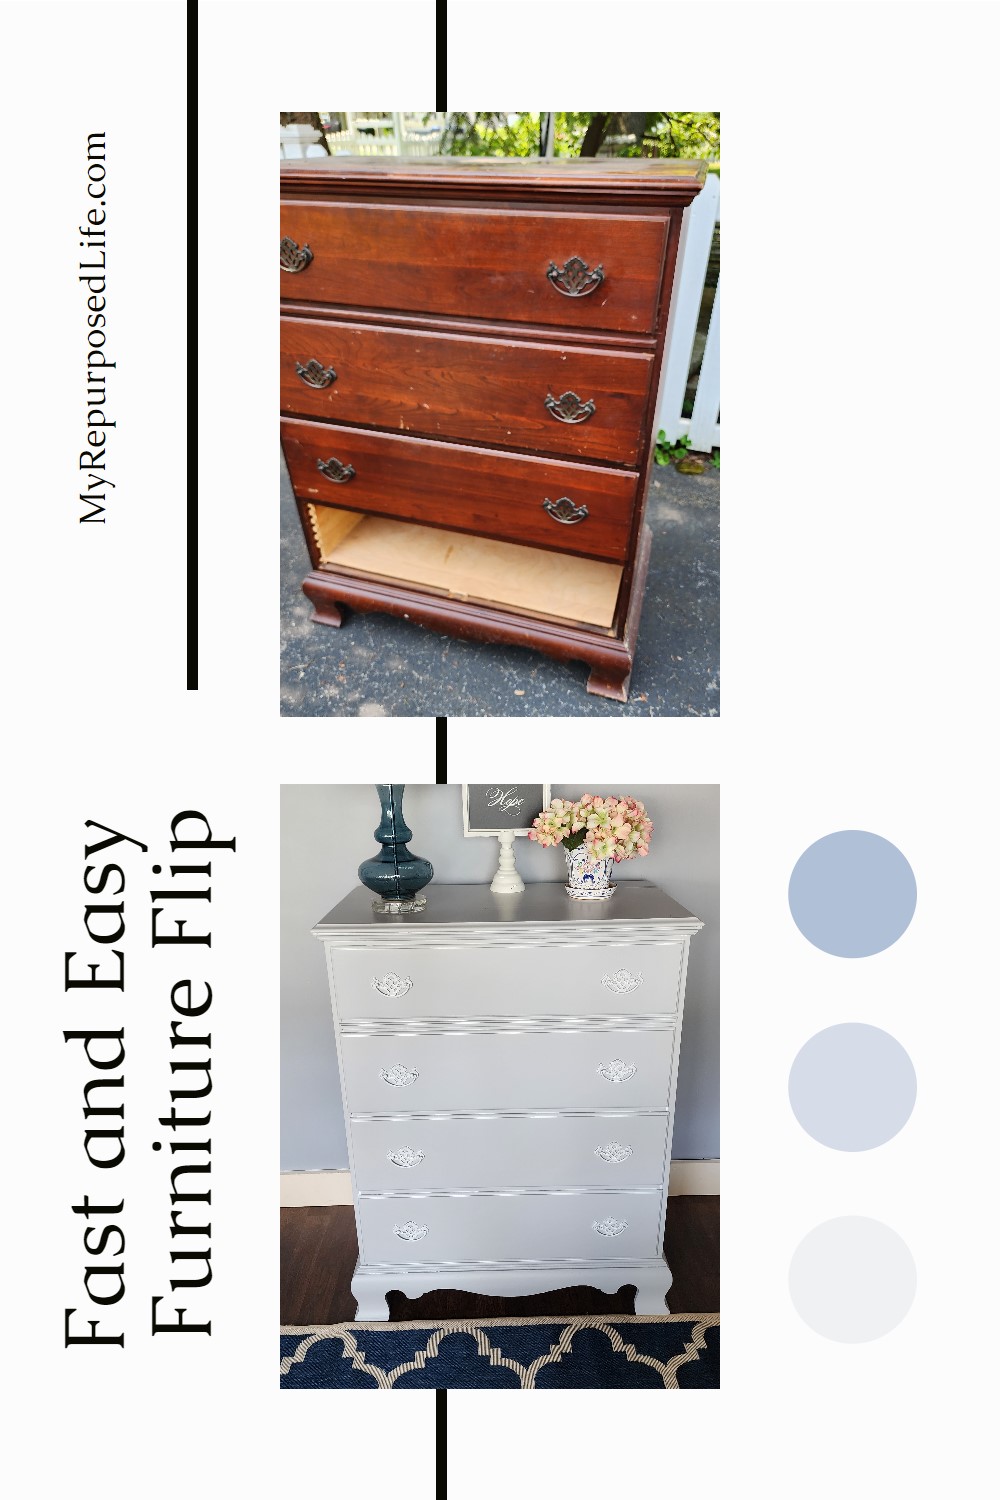 A beat up chest of drawers gets a new look with paint, repairs and a little TLC. via @repurposedlife